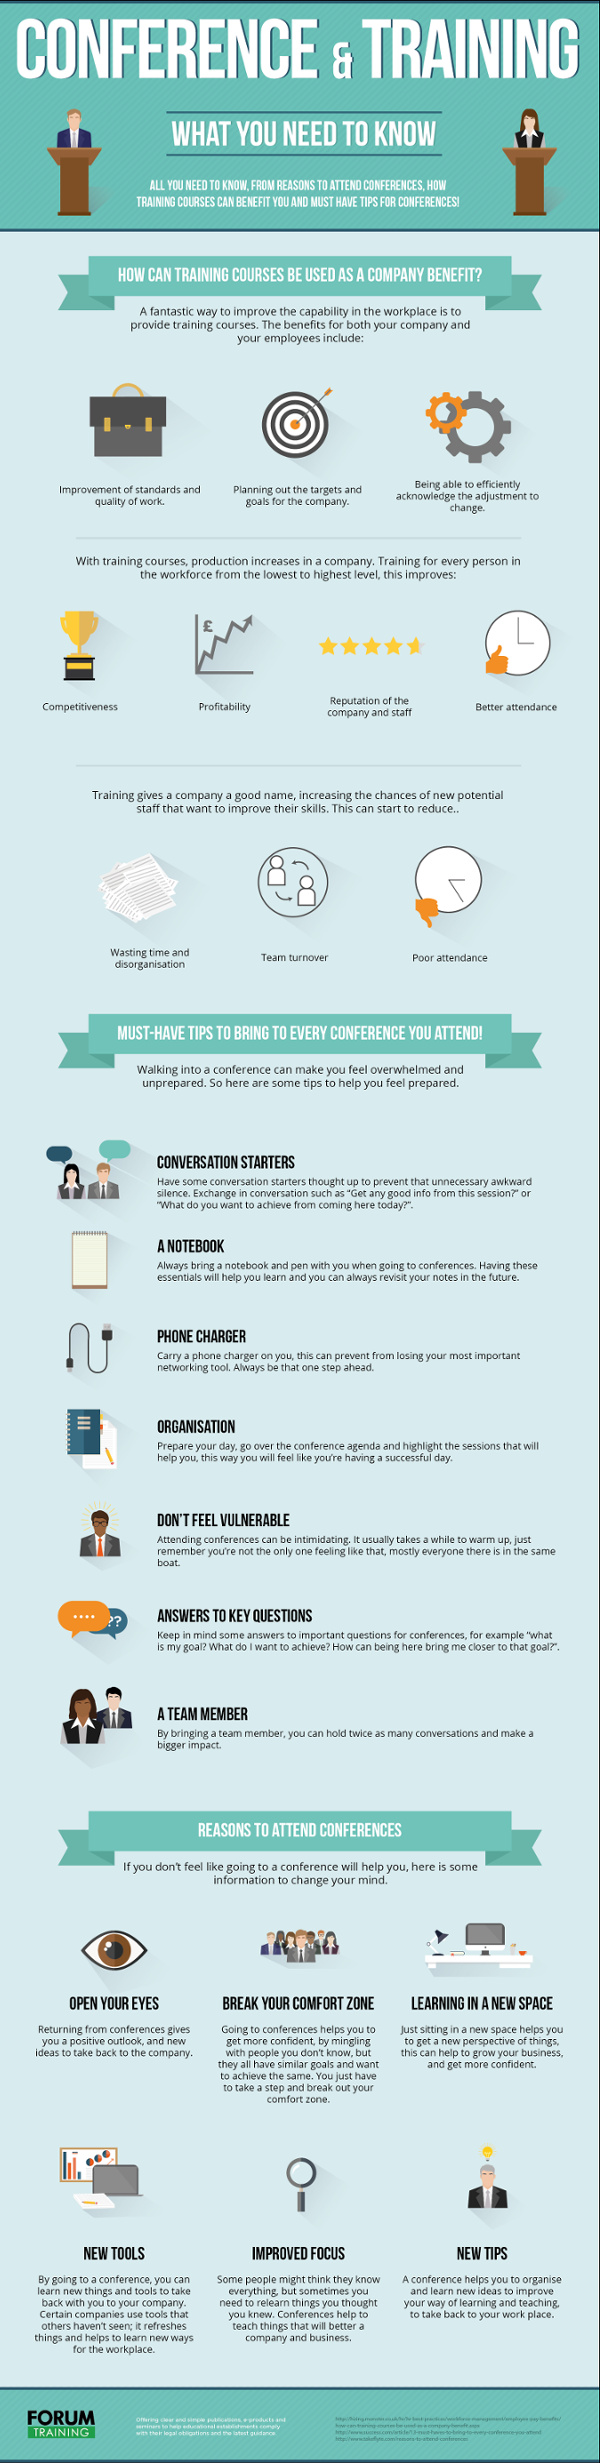 conference-training-infographic